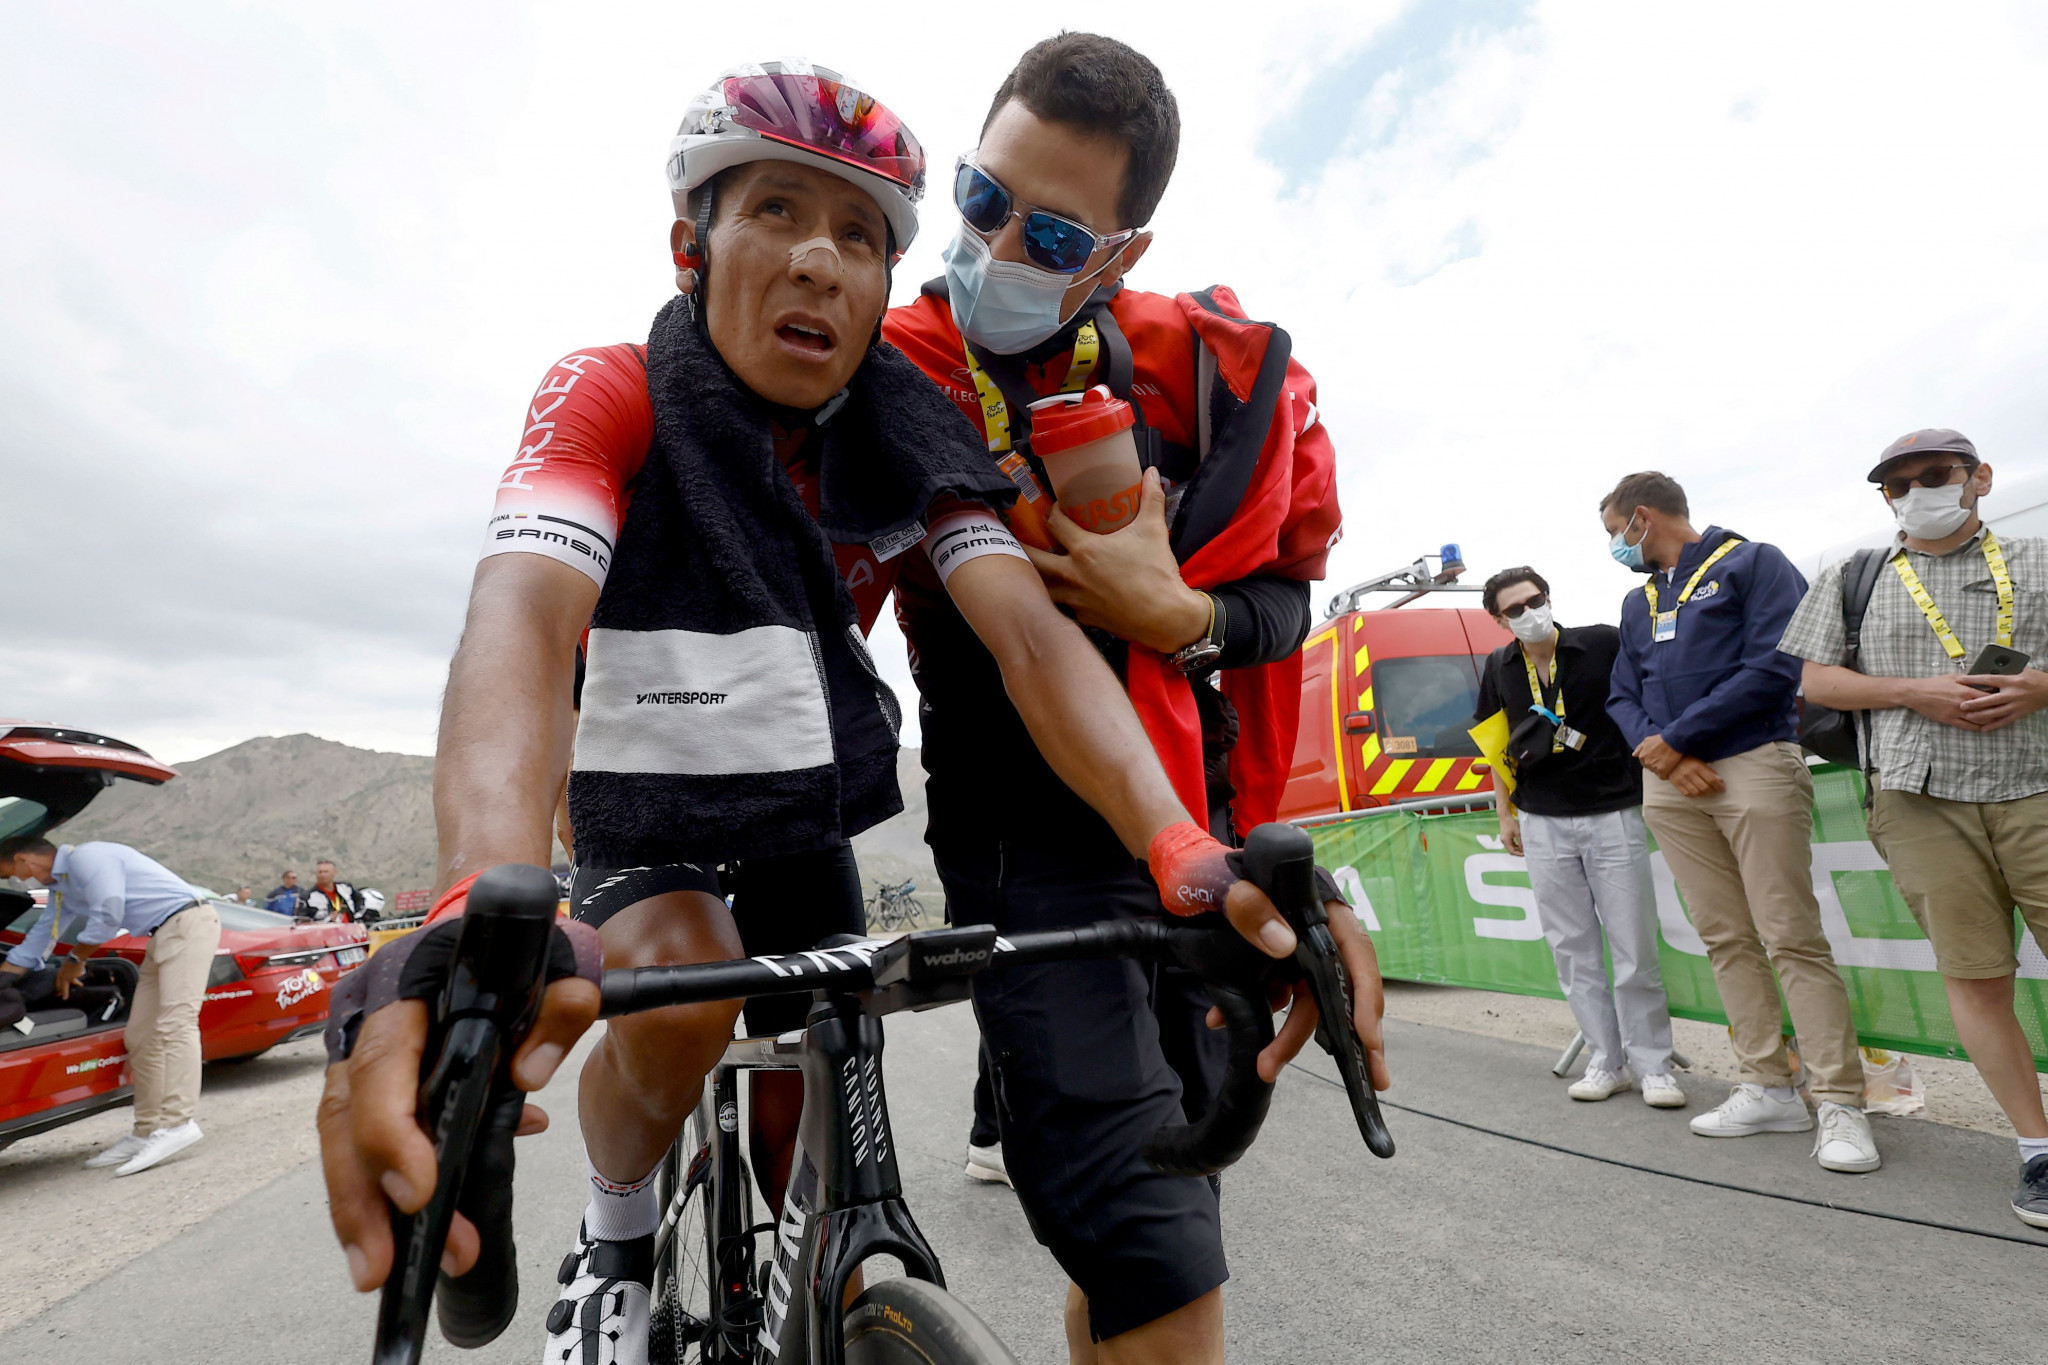 Arkéa–Samsic cyclist Nairo Quintana of Colombia has been sanctioned by the UCI ©Getty Images